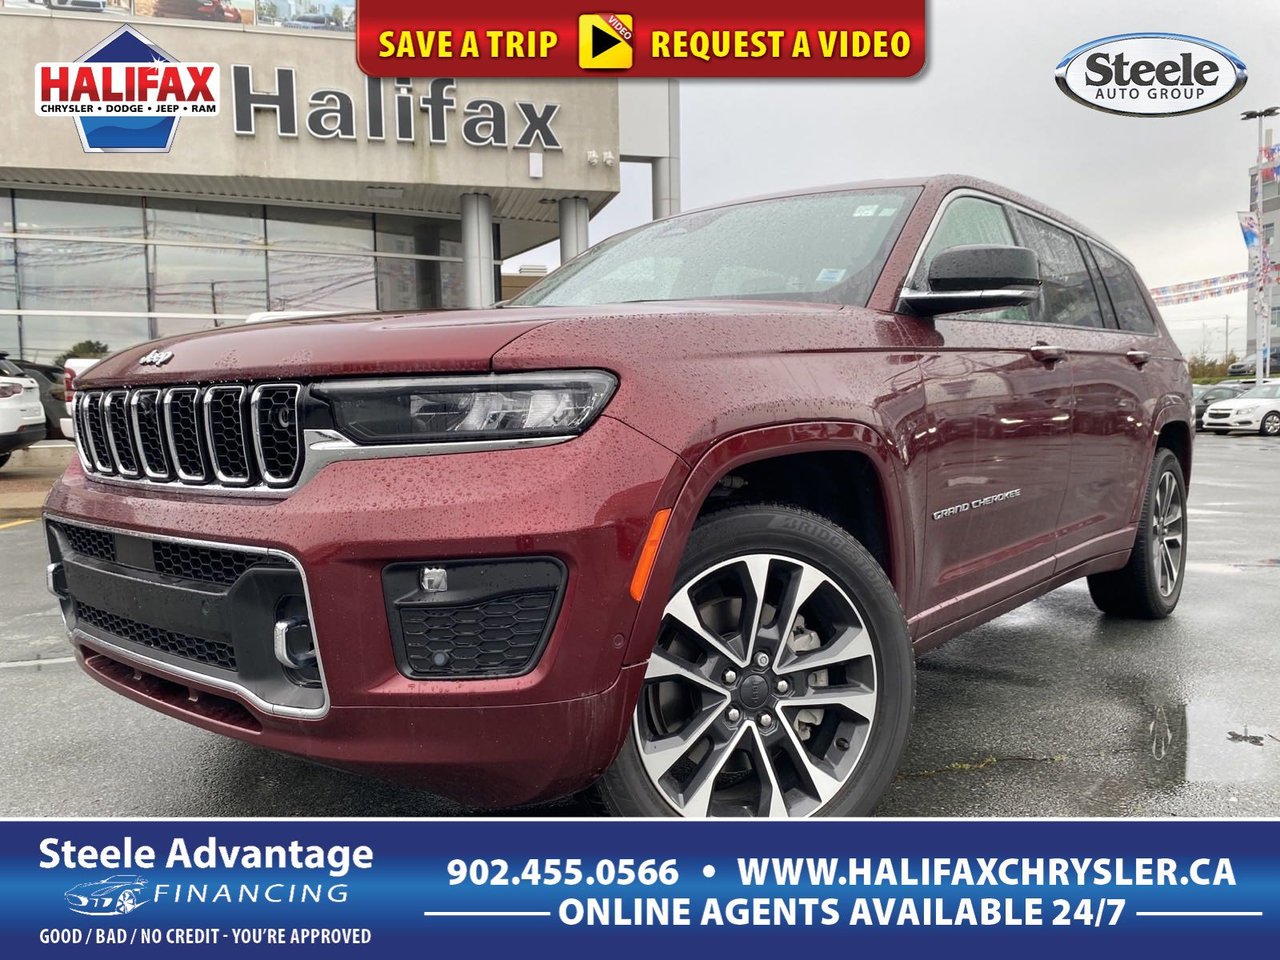 2021 Jeep Grand Cherokee L Overland 4wd - LOW KM, NAV, LEATHER, PANORAMIC SUNROOF, 7 PASSANGER,-0